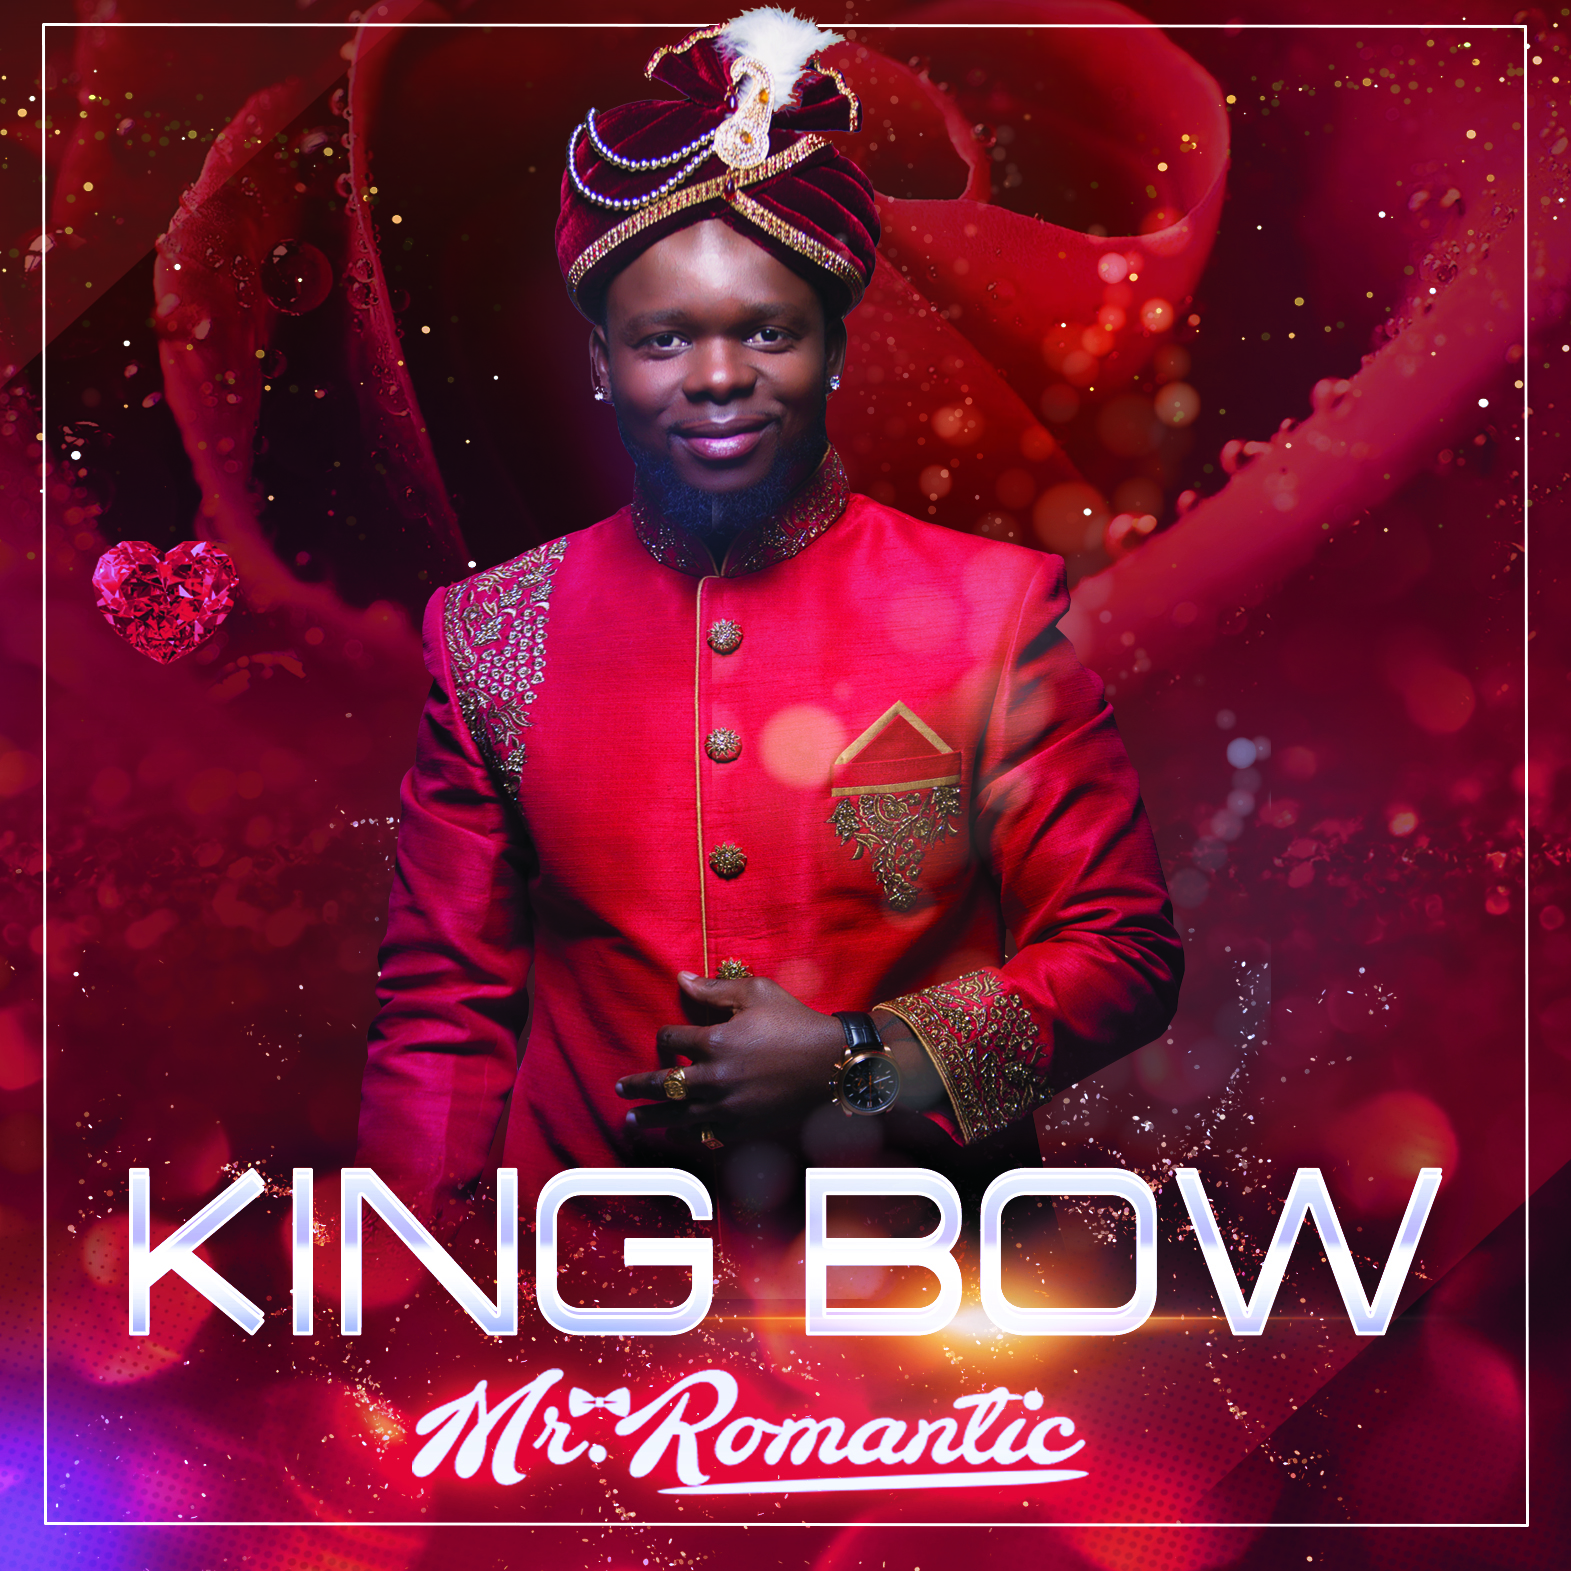 Mr Bow feat. Lizha James – The Way You Do